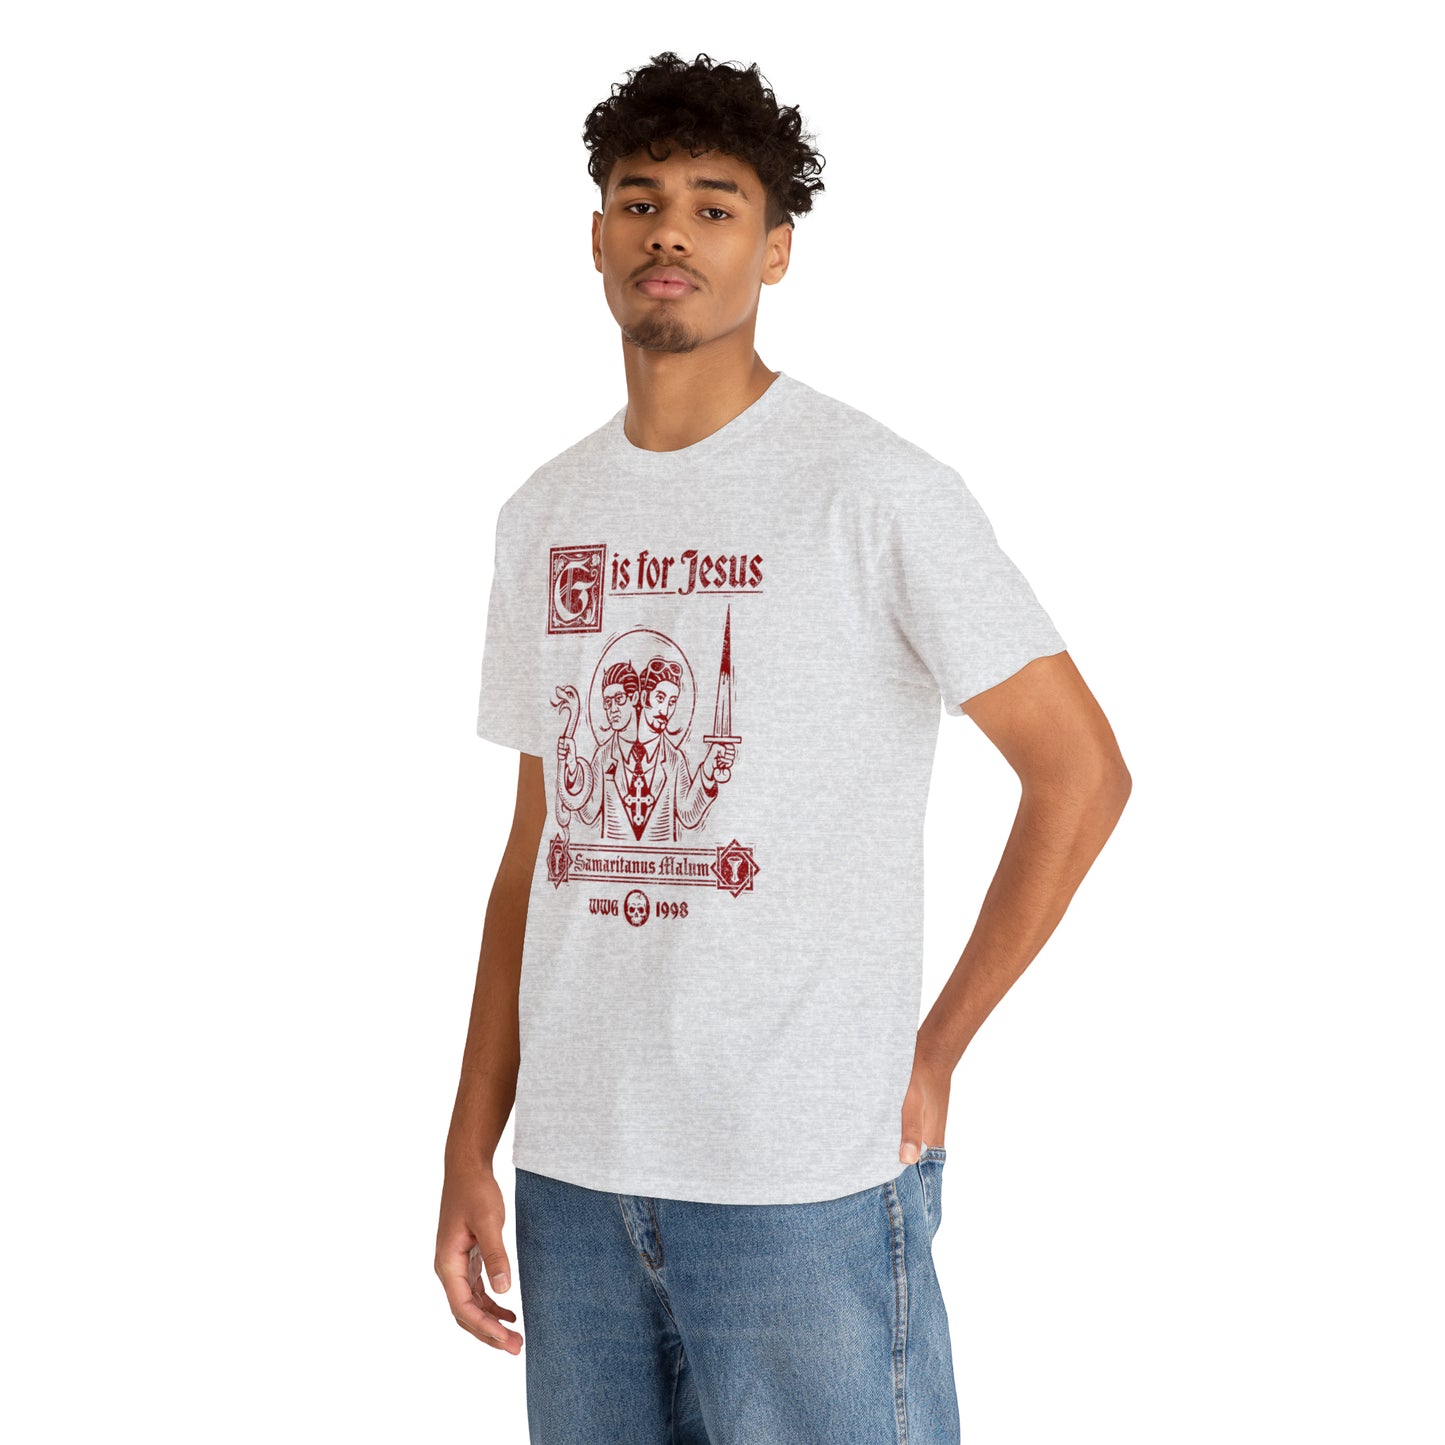 G is for Jesus T-shirt (Red Print)